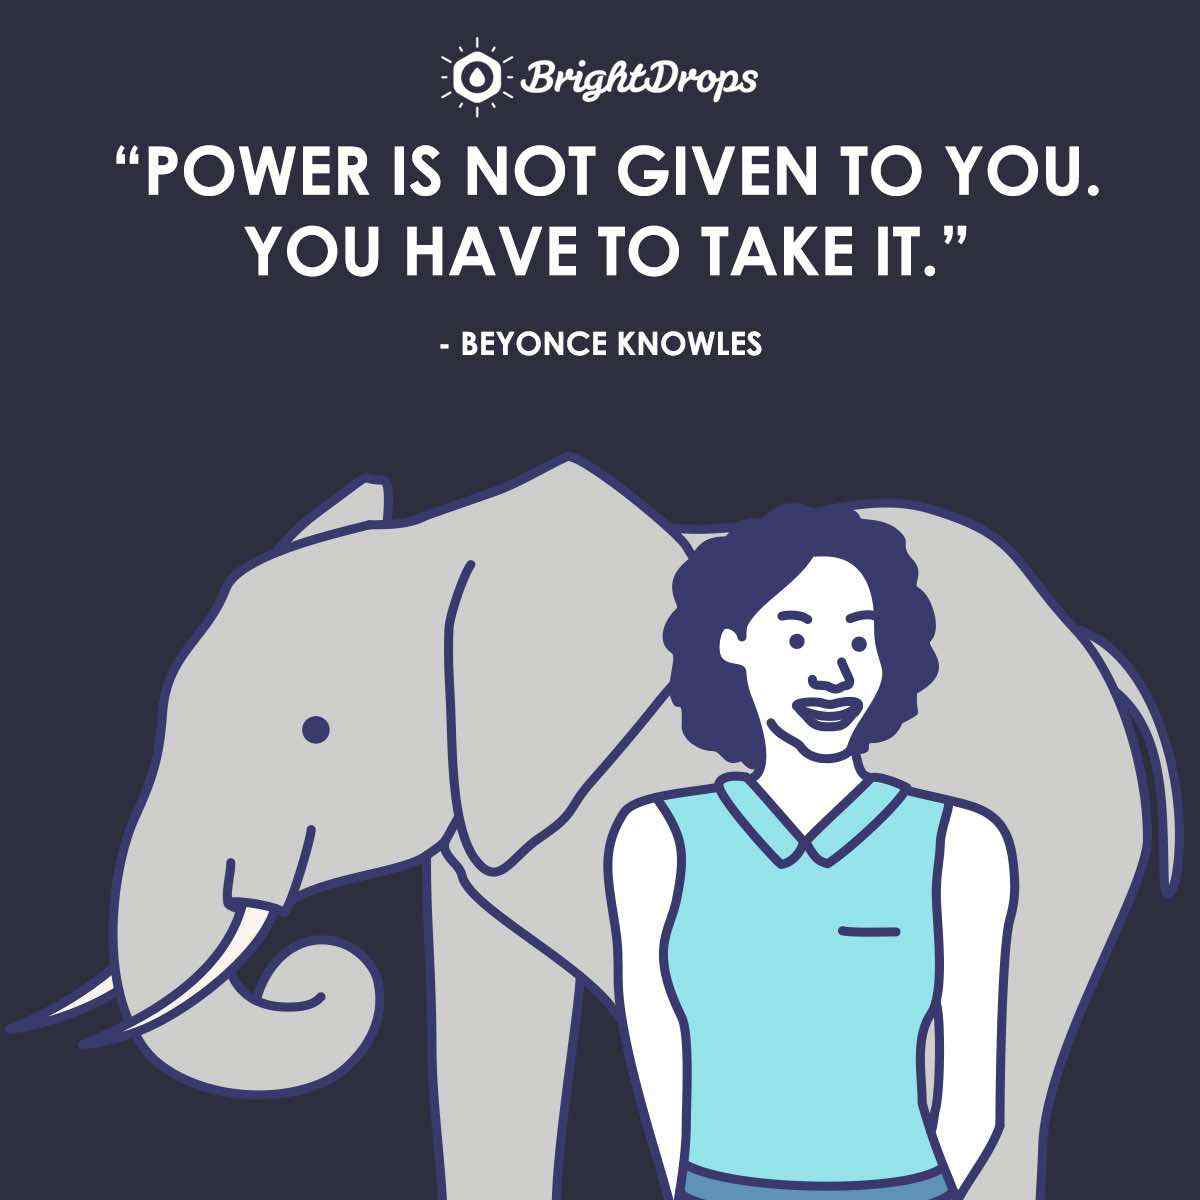 “Power is not given to you. You have to take it.” ~ Beyonce Knowles